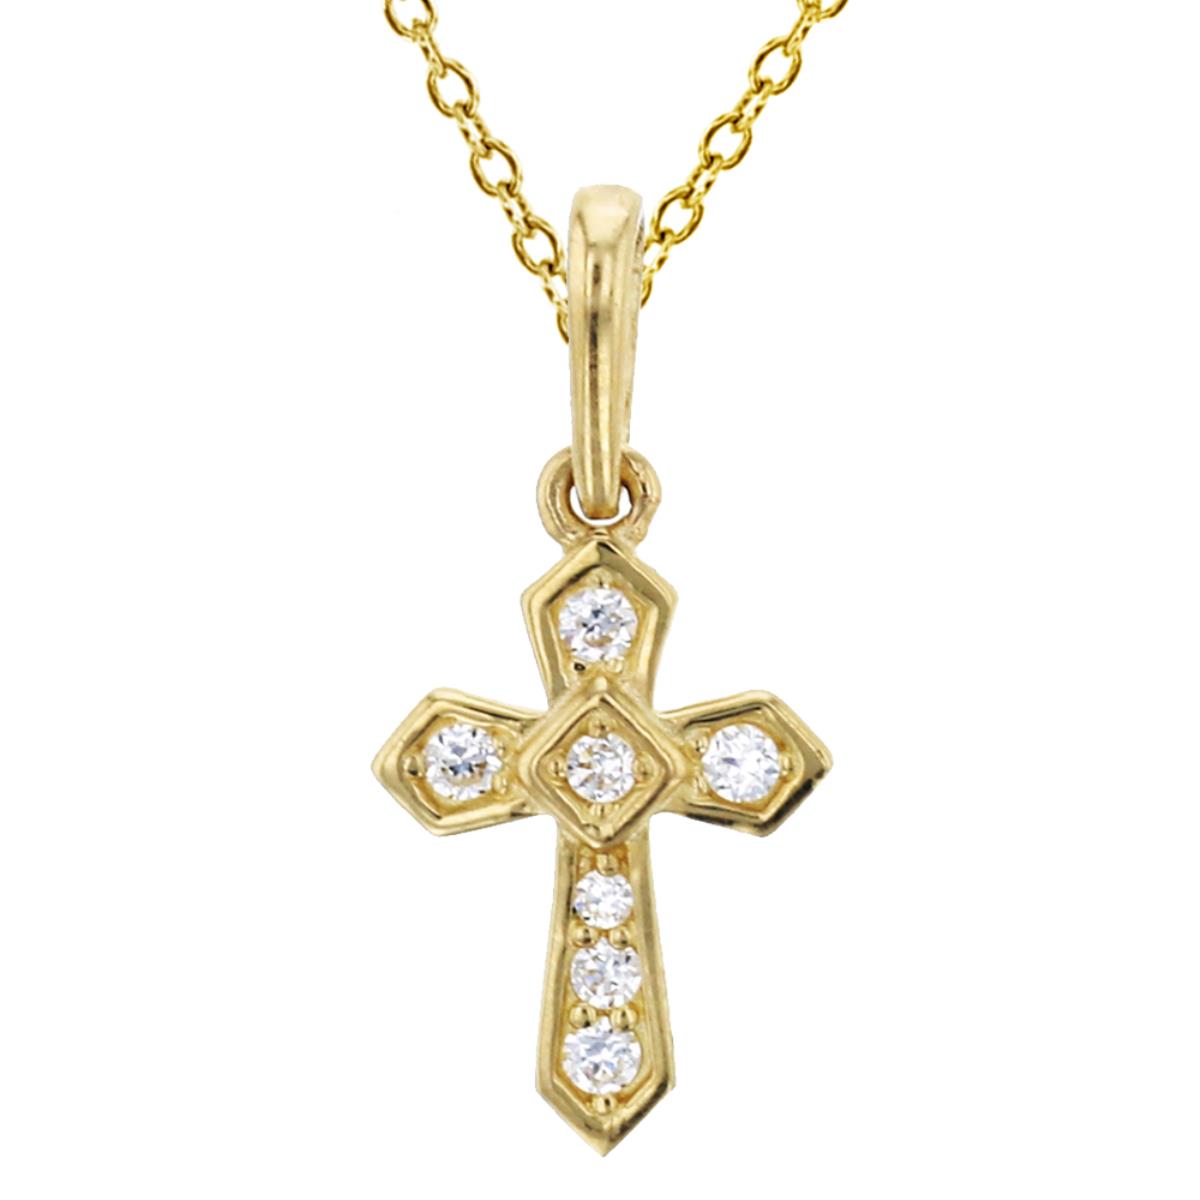 10K Yellow Gold Polished CZ Cross Dangling 18" Necklace